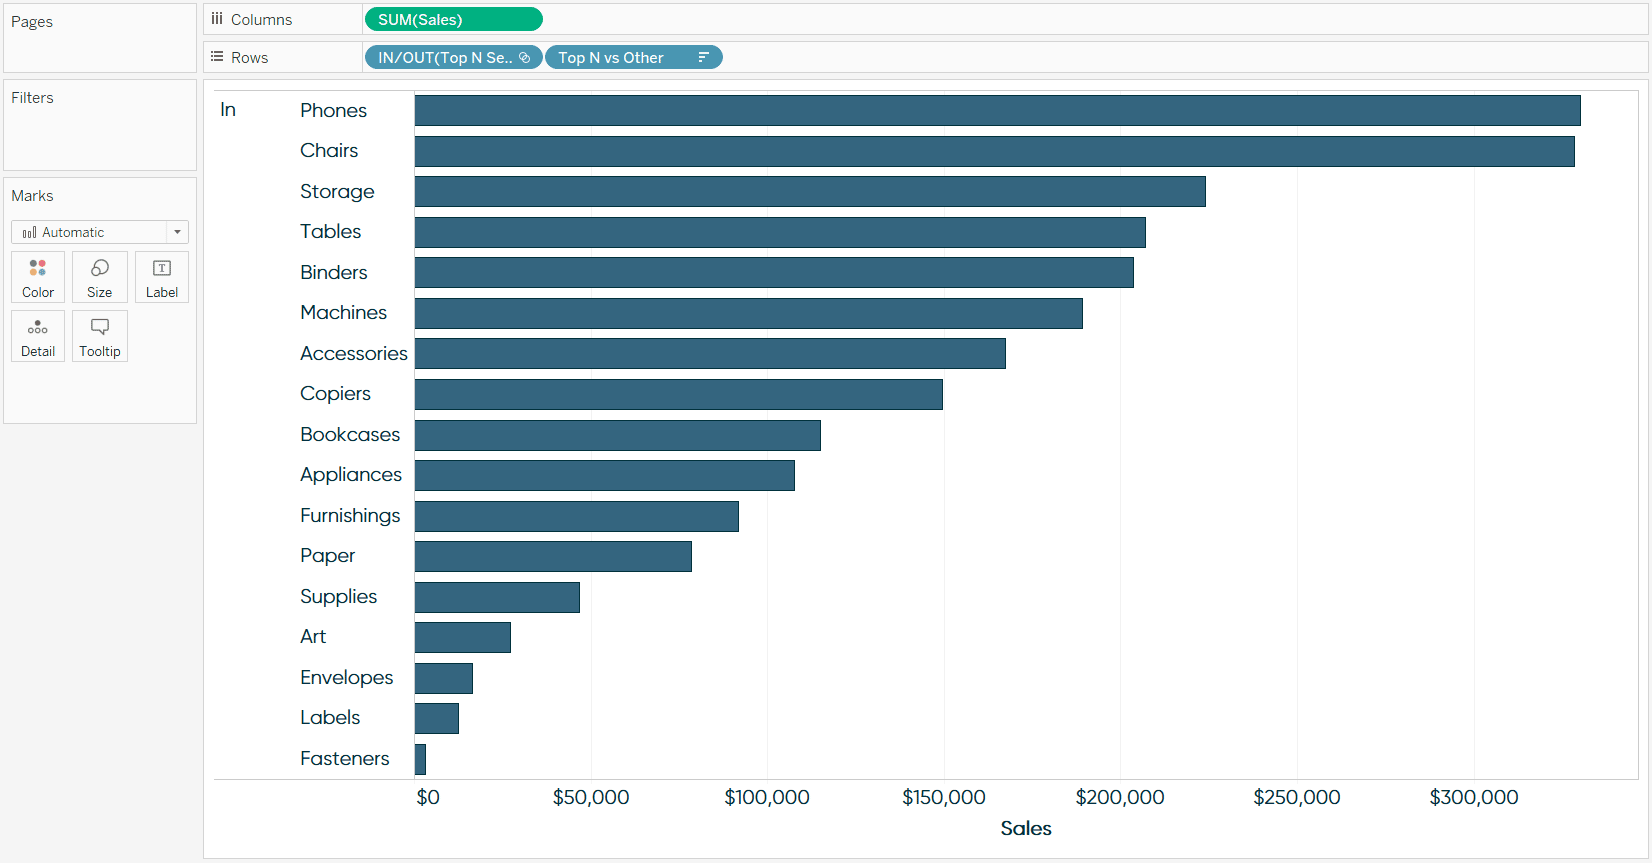 Sales by Top N vs Other Bar Chart in Tableau